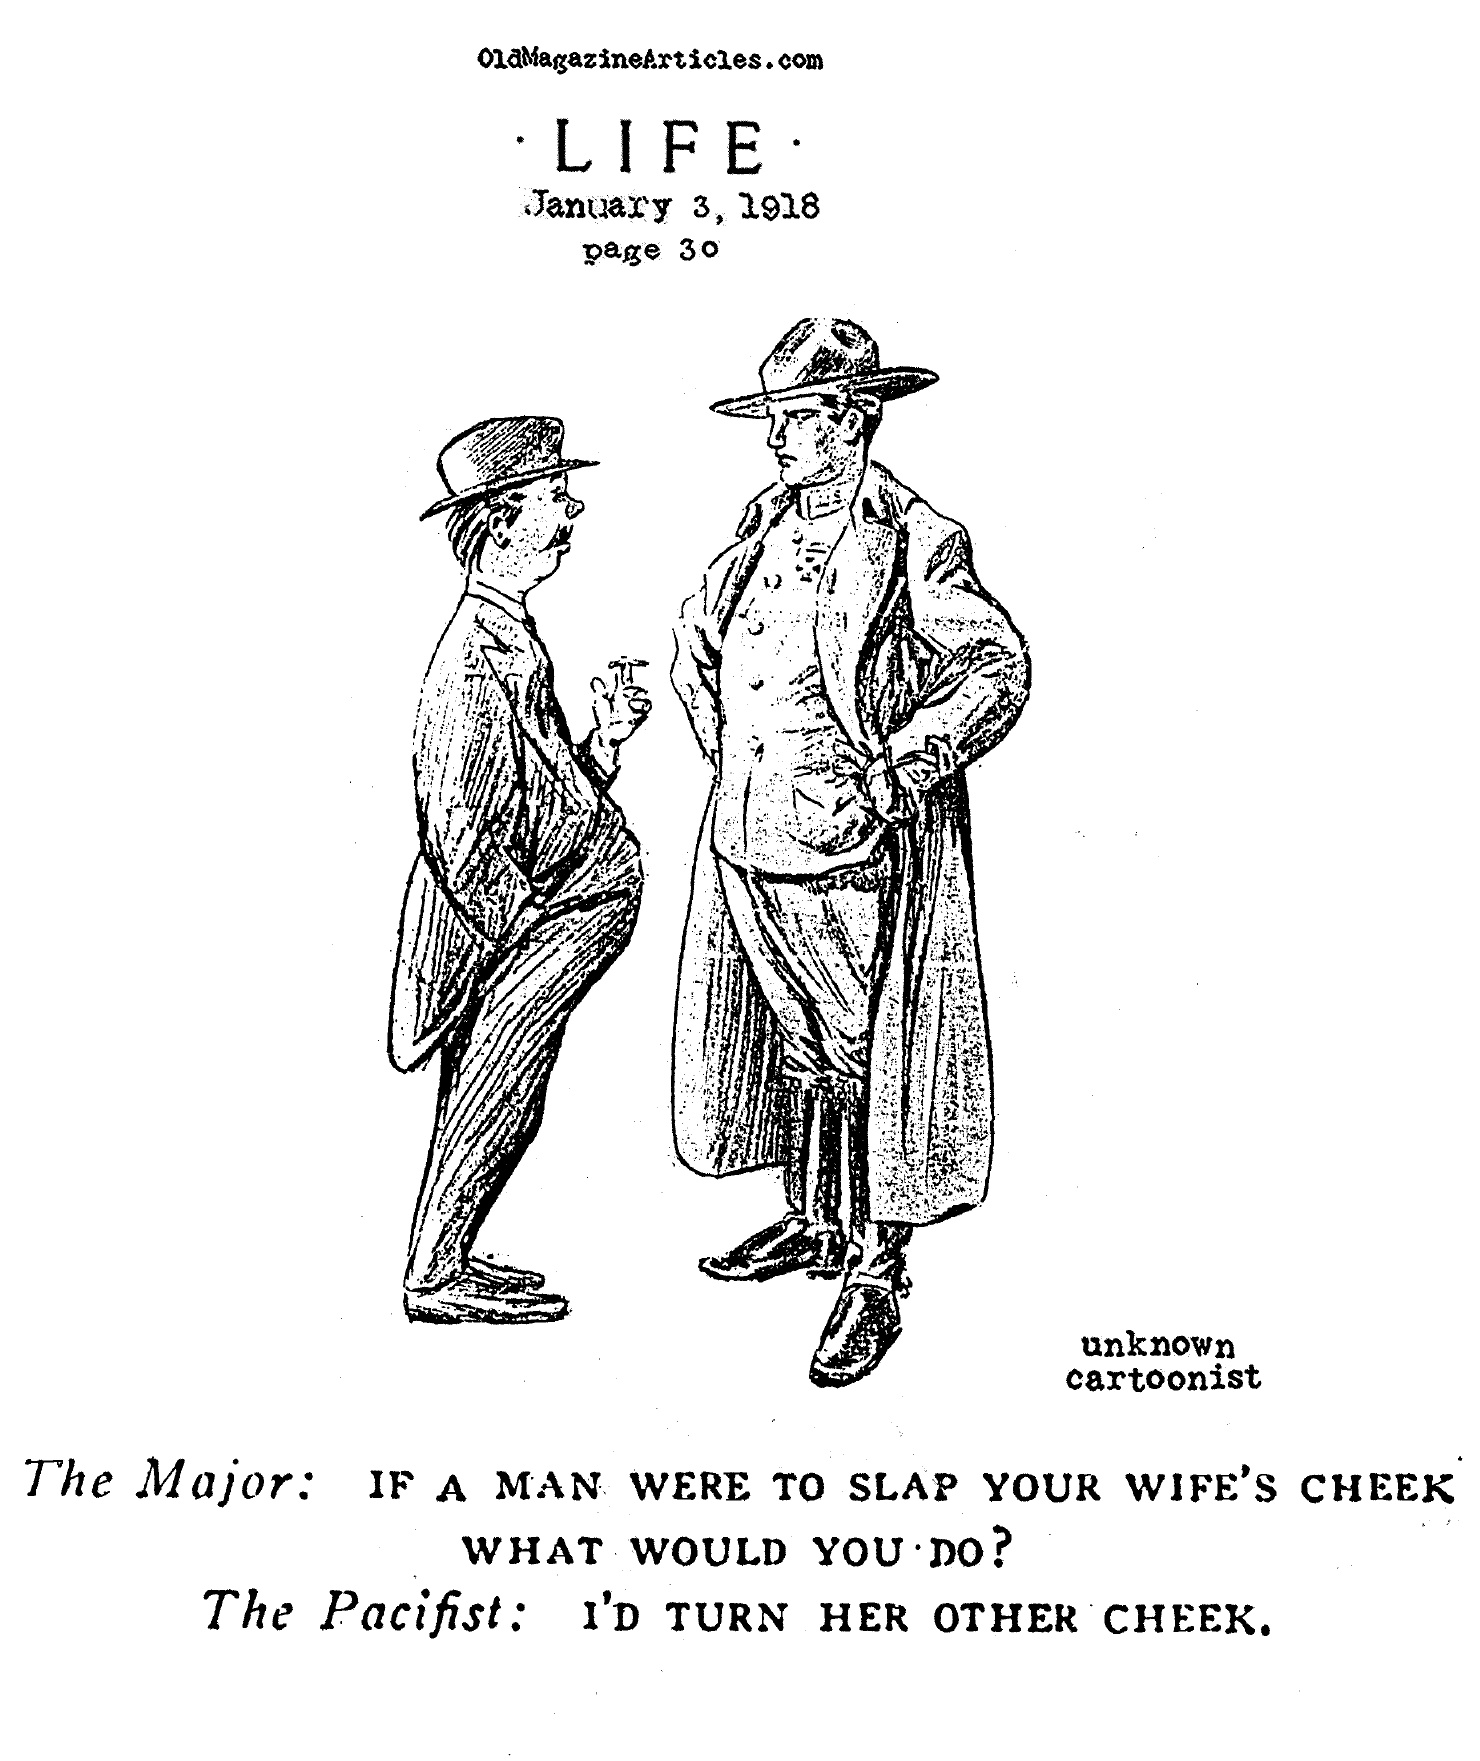 A Swipe at Pacifism (Life Magazine, 1918)